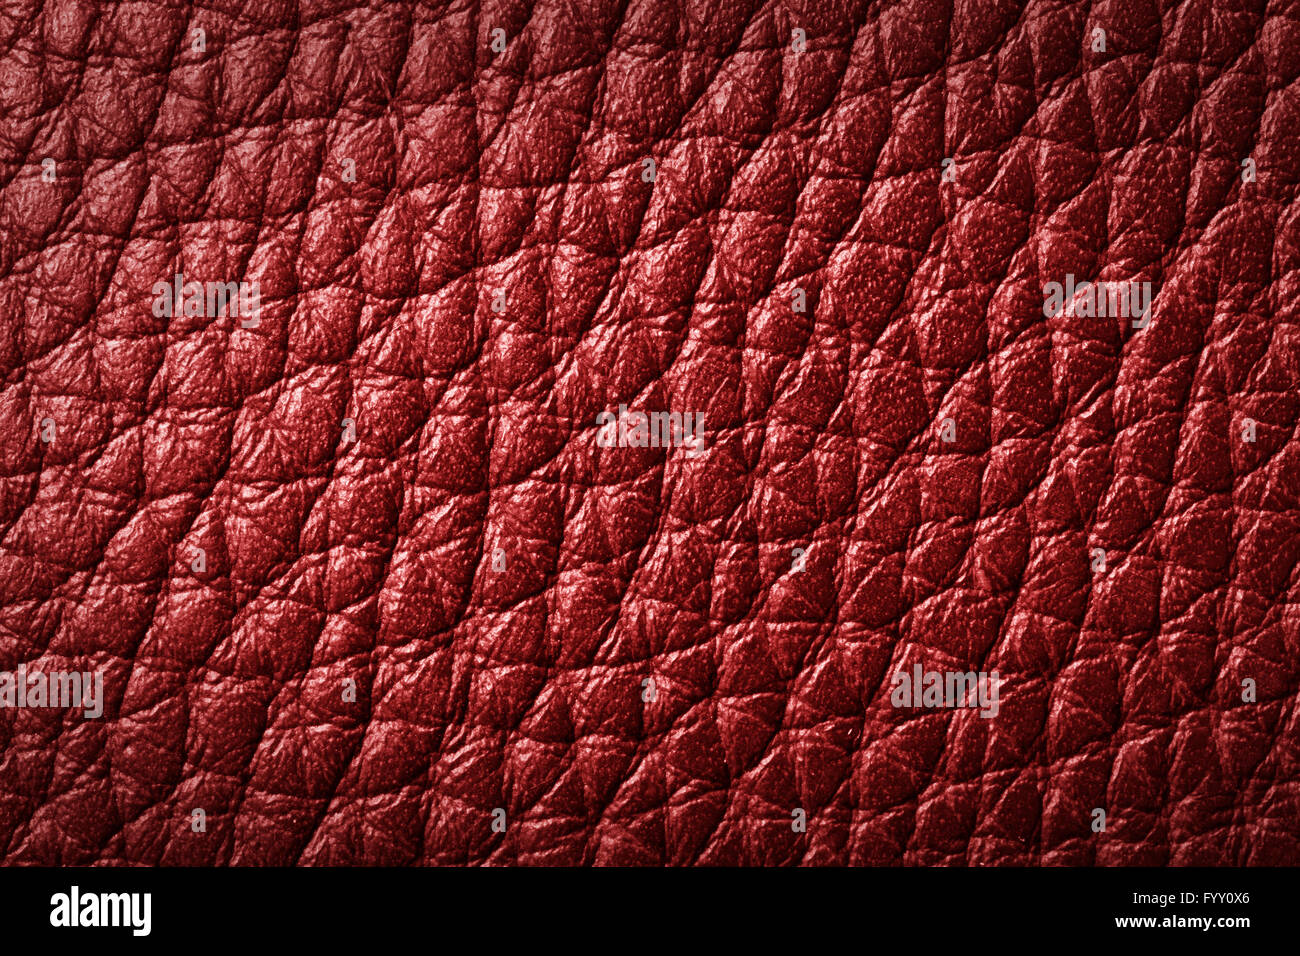 Genuine red leather background Stock Photo